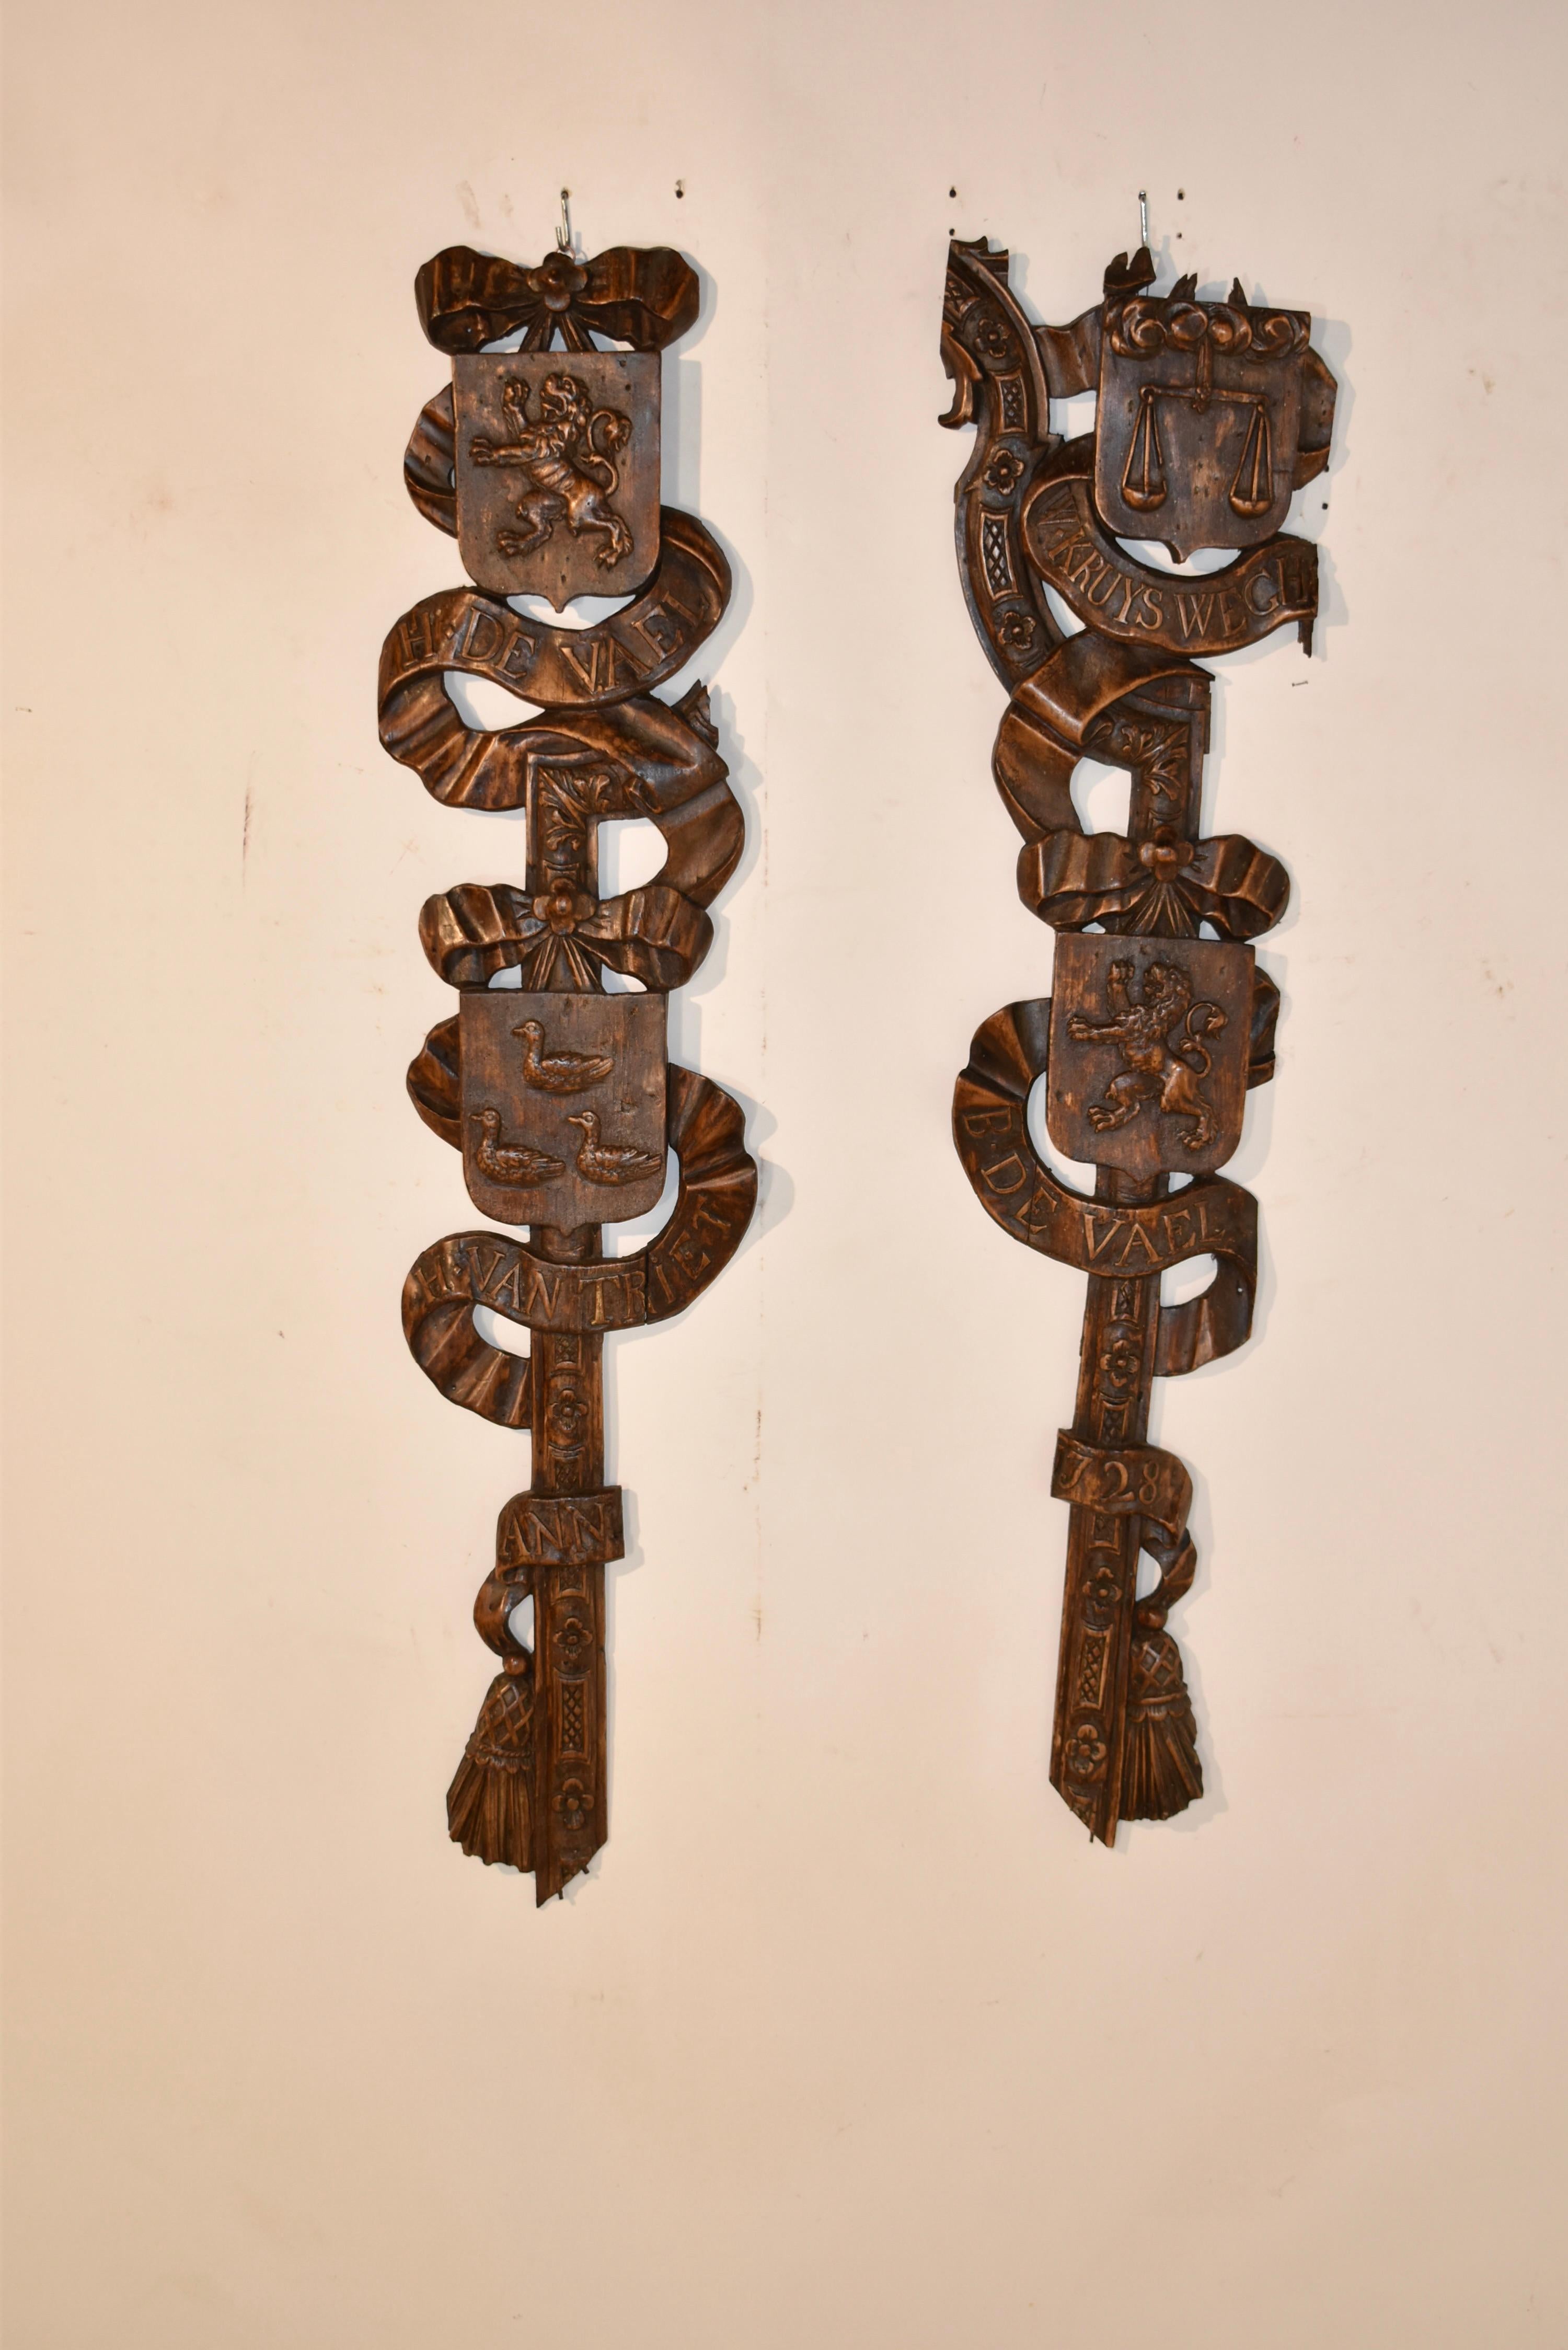 Pair of hand carvings made from fruitwood that most likely came from a surround of a door in an 18th century home in the Netherlands.  The carvings  depict ribbons and carved moldings, like framing elements.  These include family names and armorial